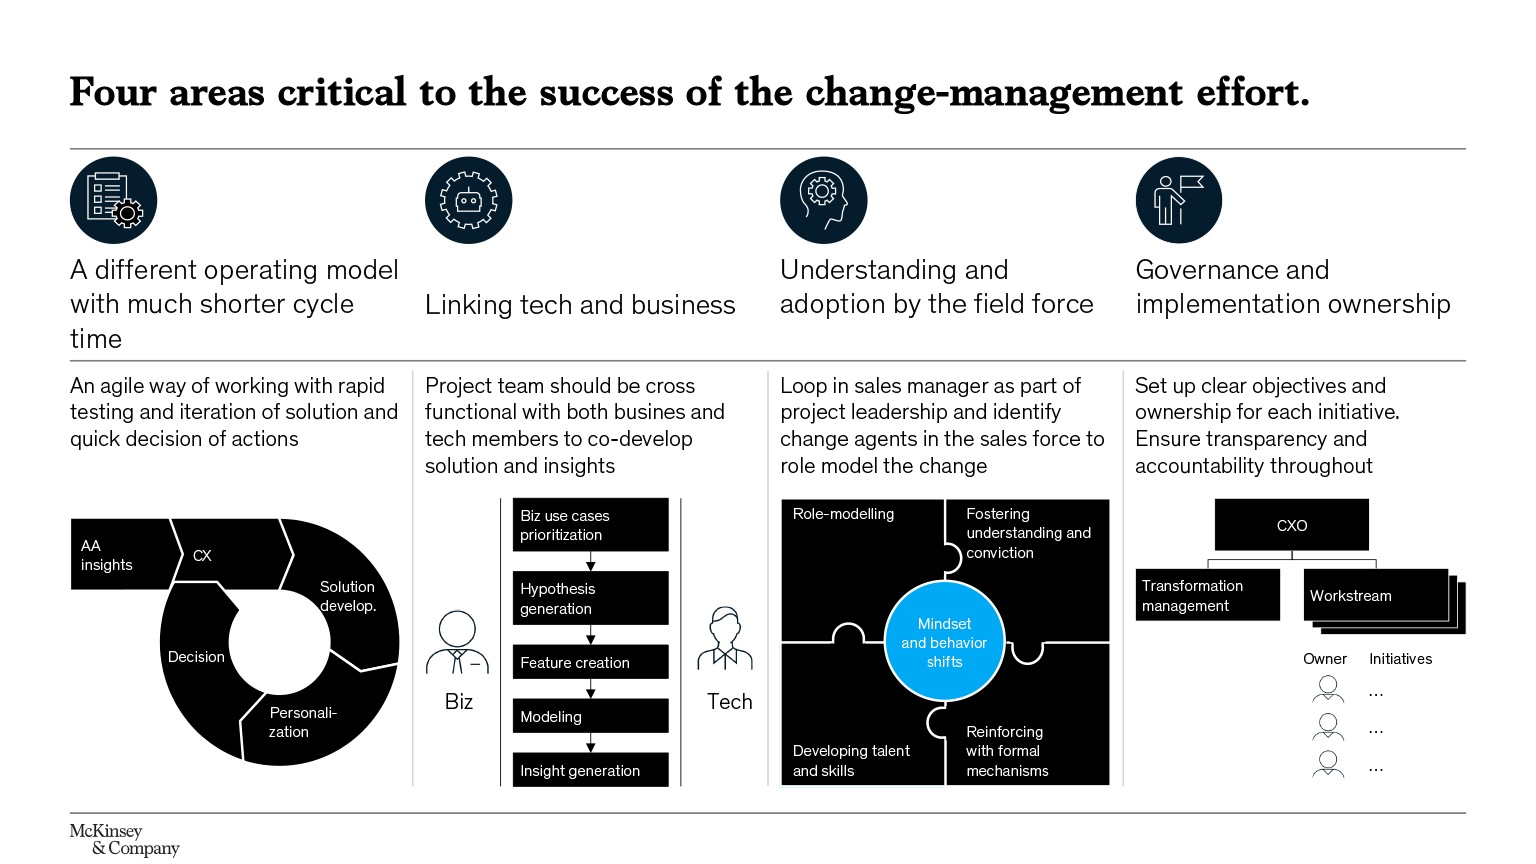 Four areas critical to the success of the change-management effort